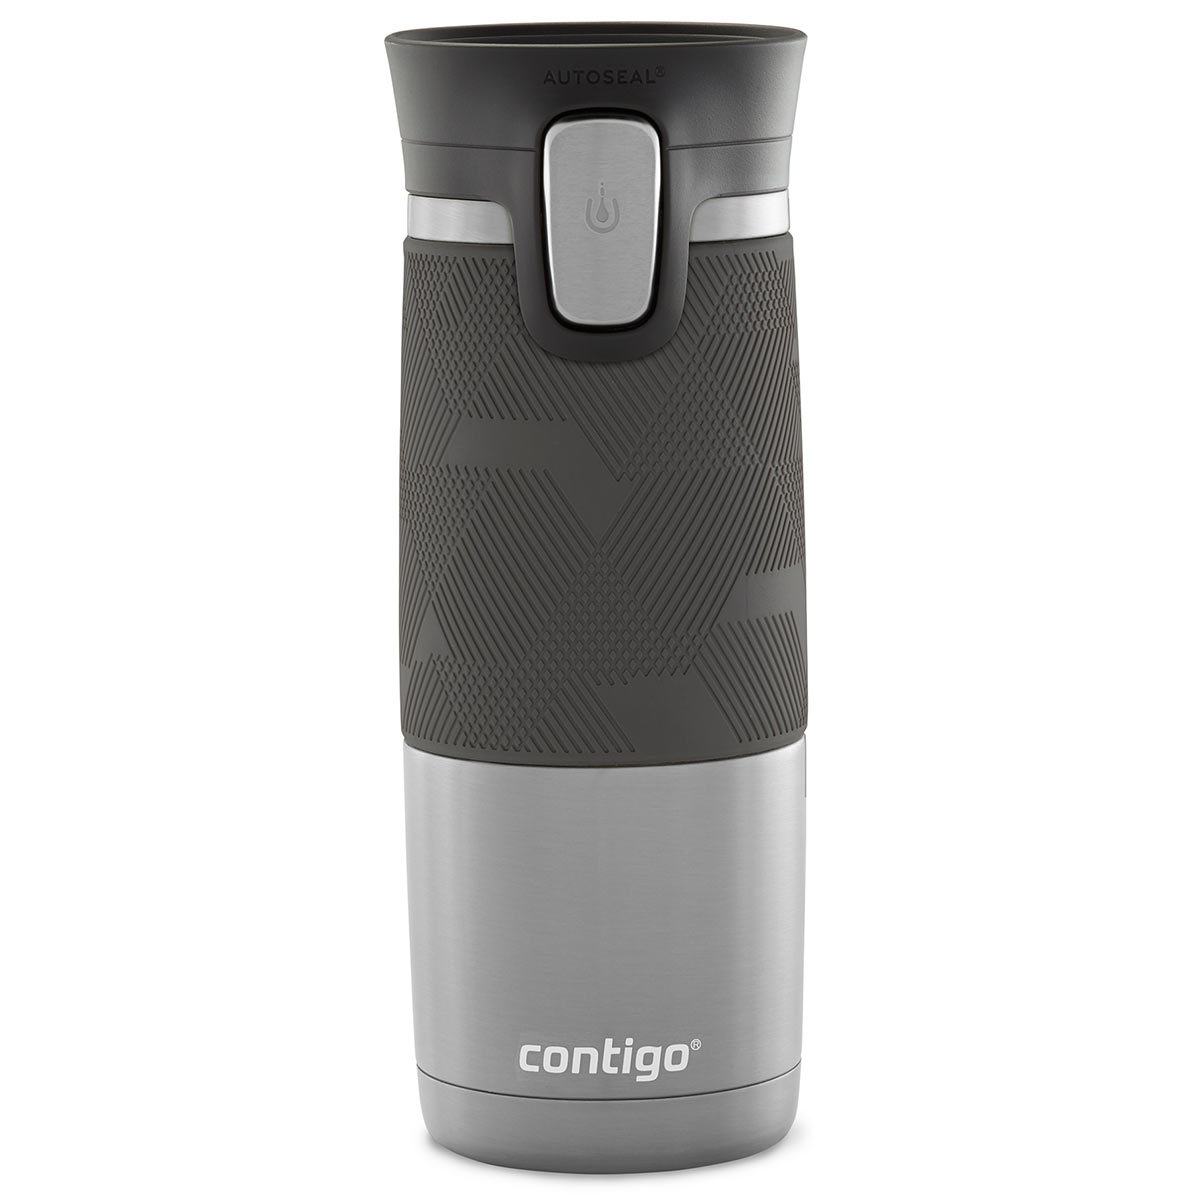 Contigo Autoseal Spill-proof Thermal Travel Mugs, 2 Pack in Red & Grey